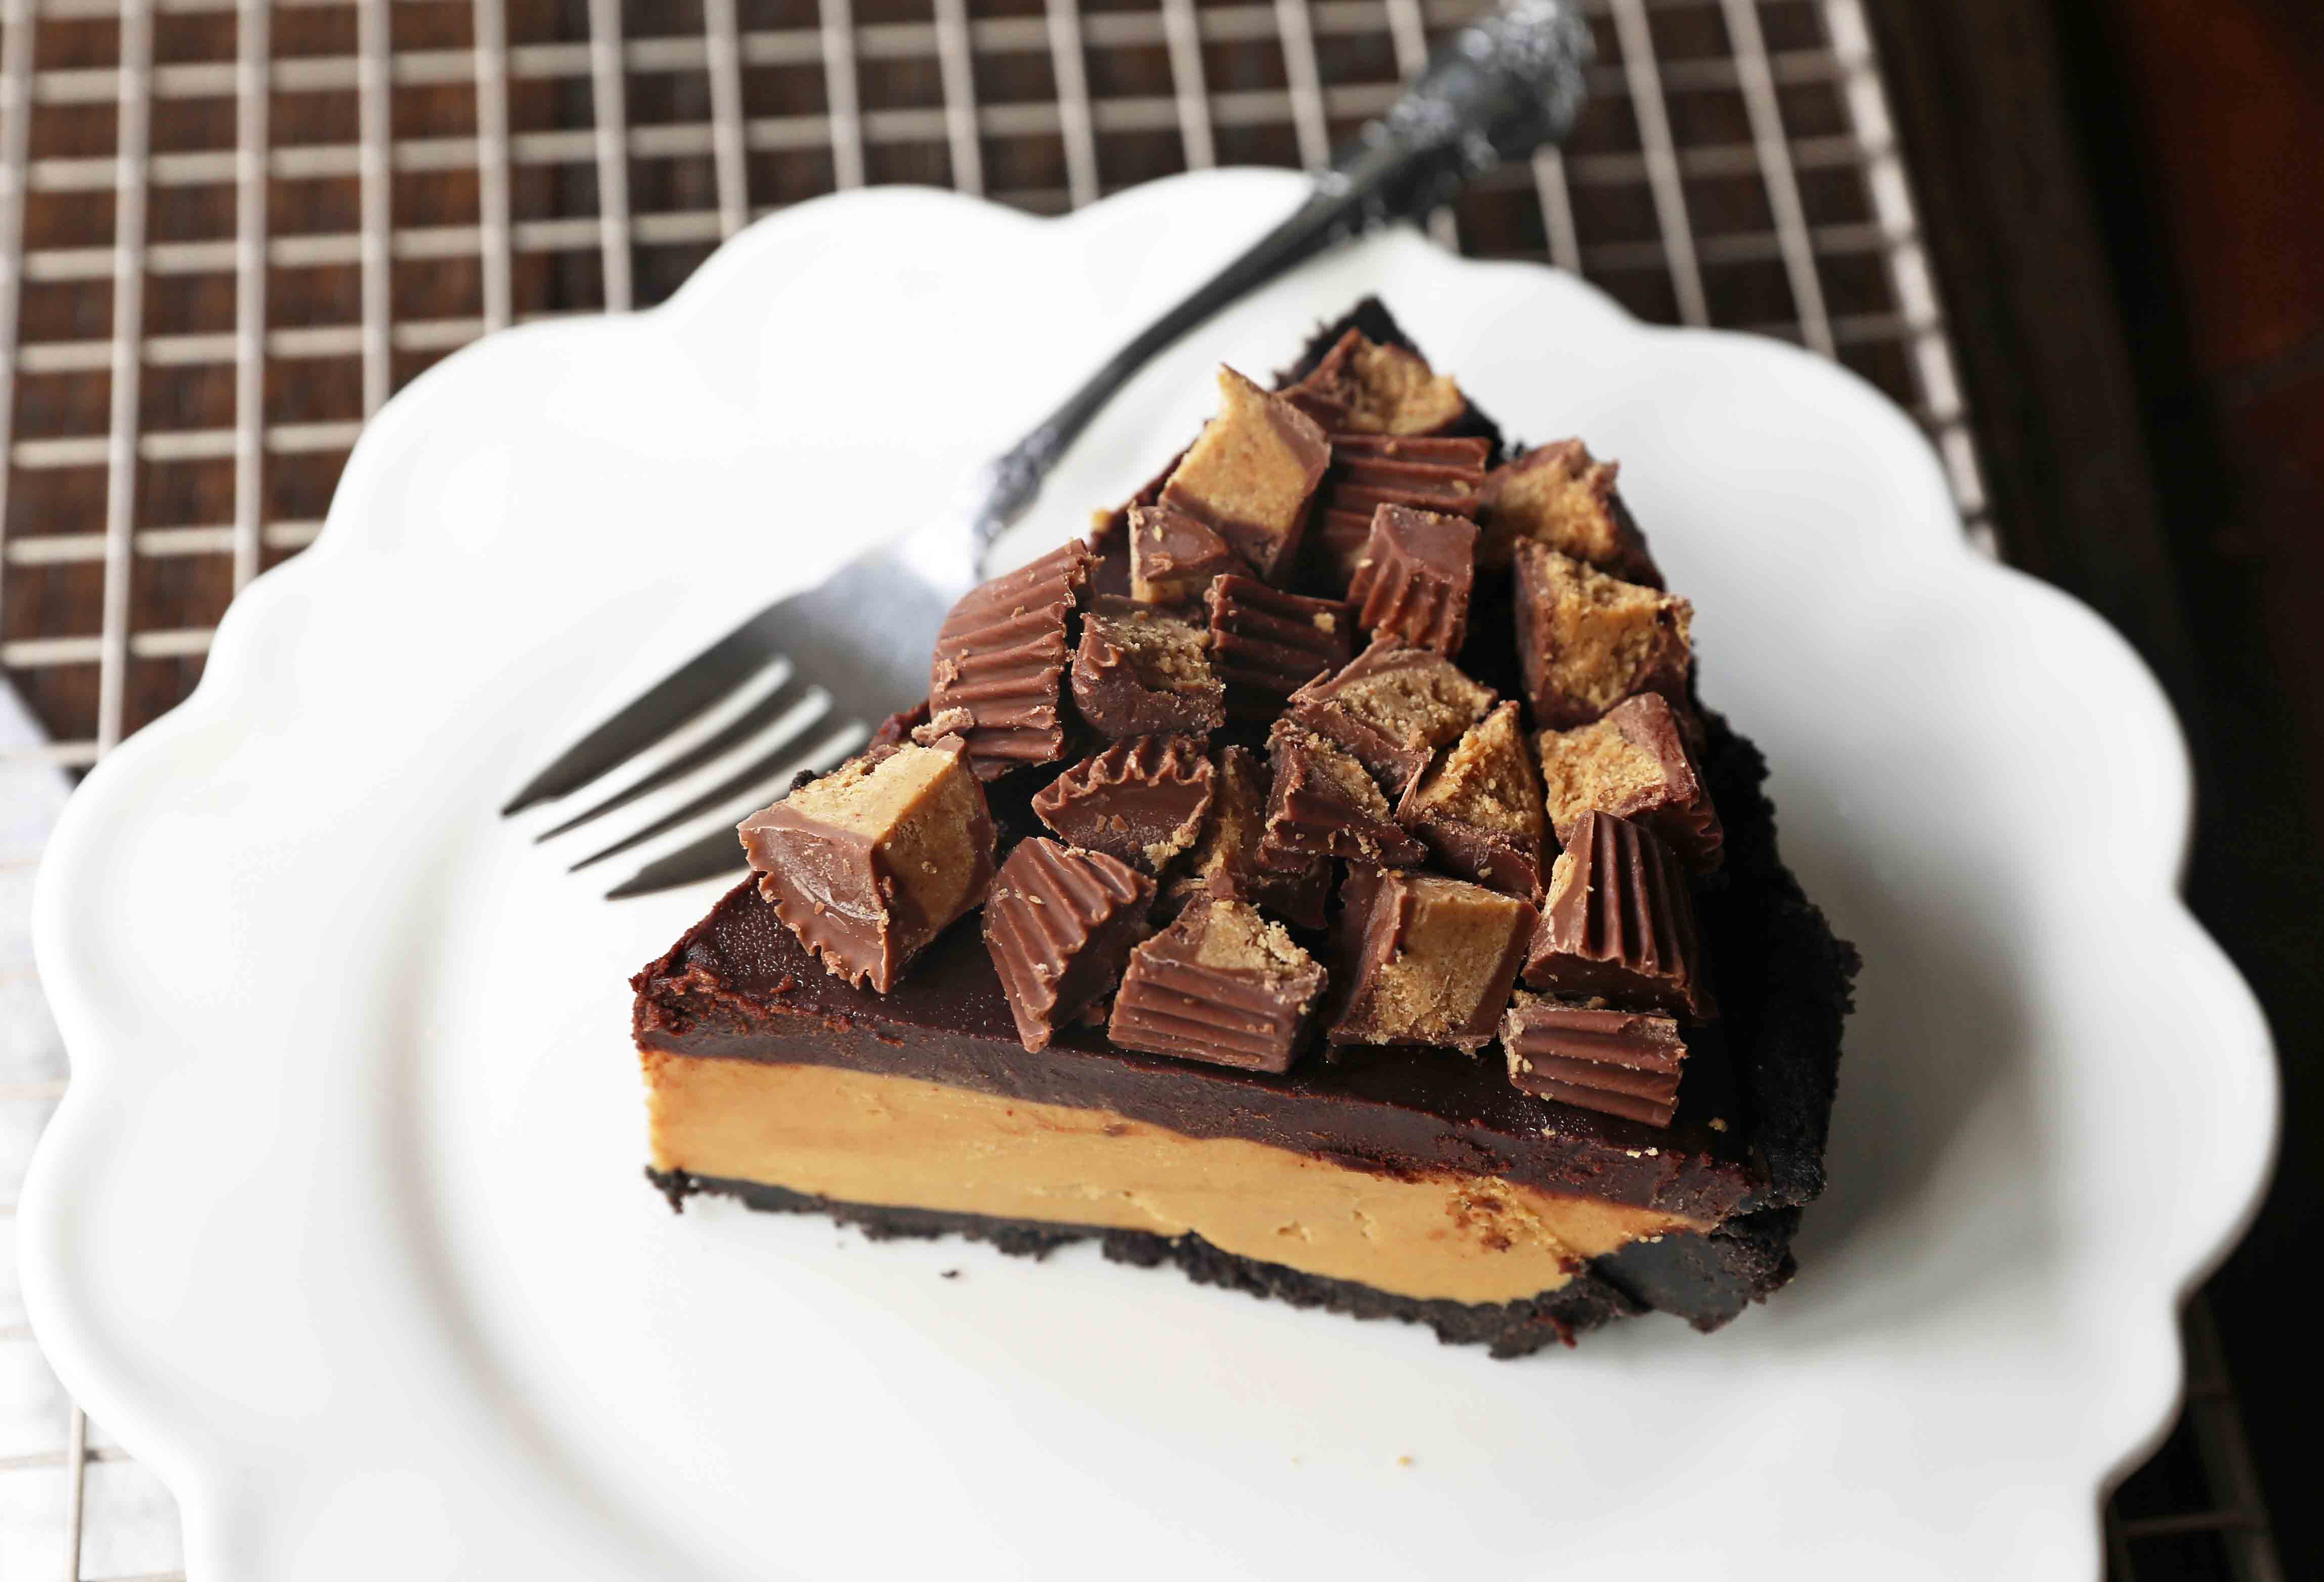 Chocolate Peanut Butter Cup Pie. Homemade chocolate peanut butter pie with an OREO cookie crust, creamy peanut butter mousse filling, and topped with chocolate ganache and peanut butter cups. www.modernhoney.com #peanutbutter #chocolatepeanutbutter #pie #pies #pierecipe 